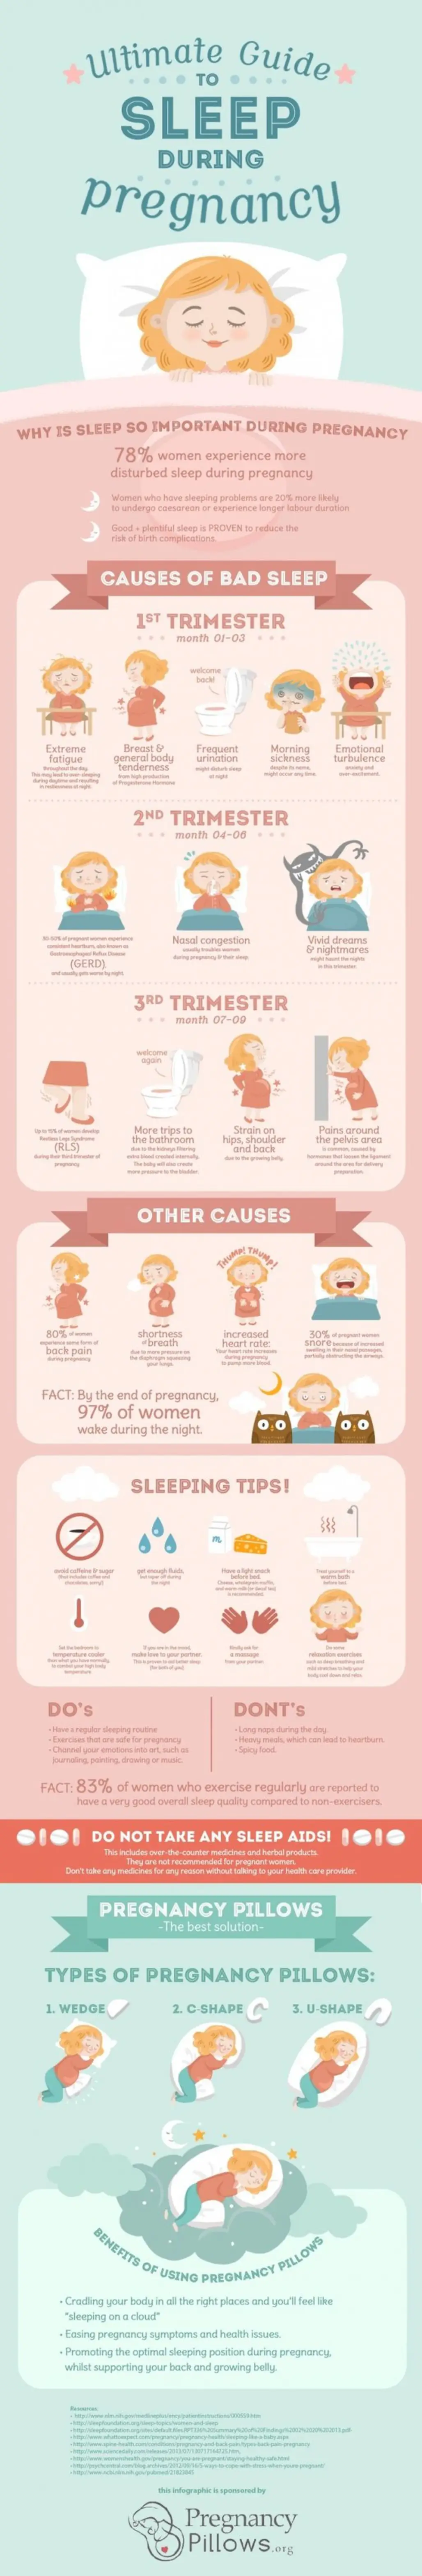 Ultimate Guide to Sleep during Pregnancy